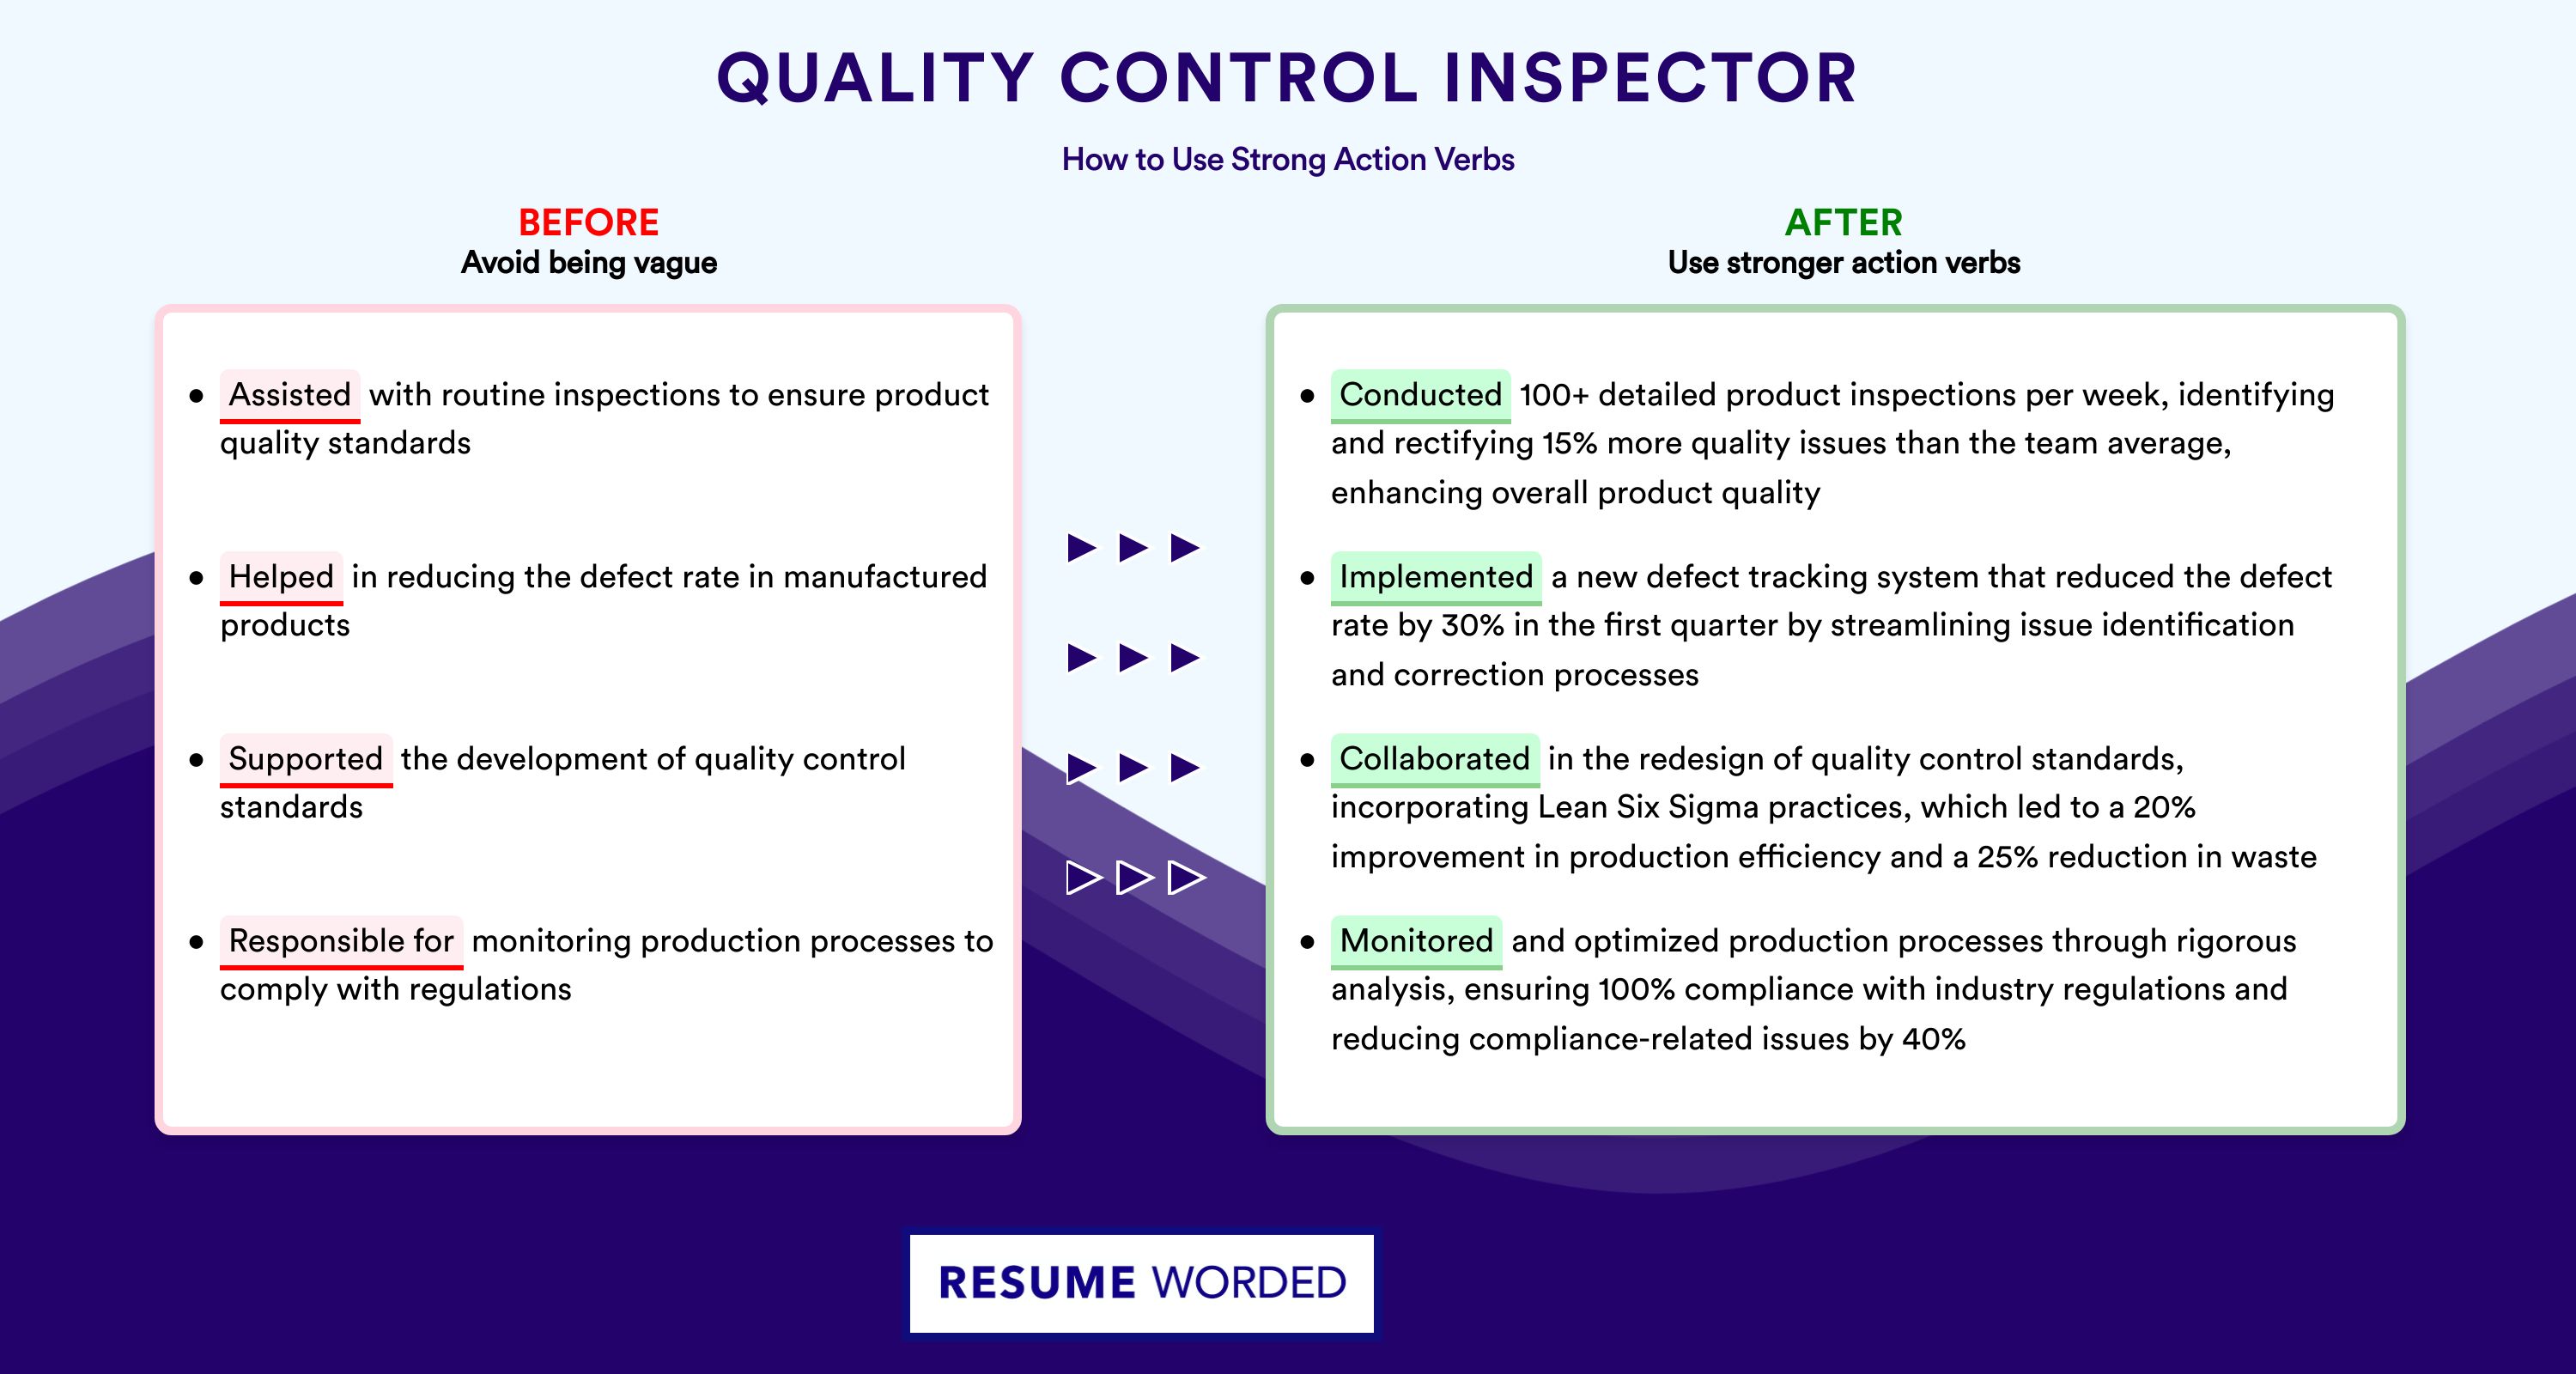 Action Verbs for Quality Control Inspector